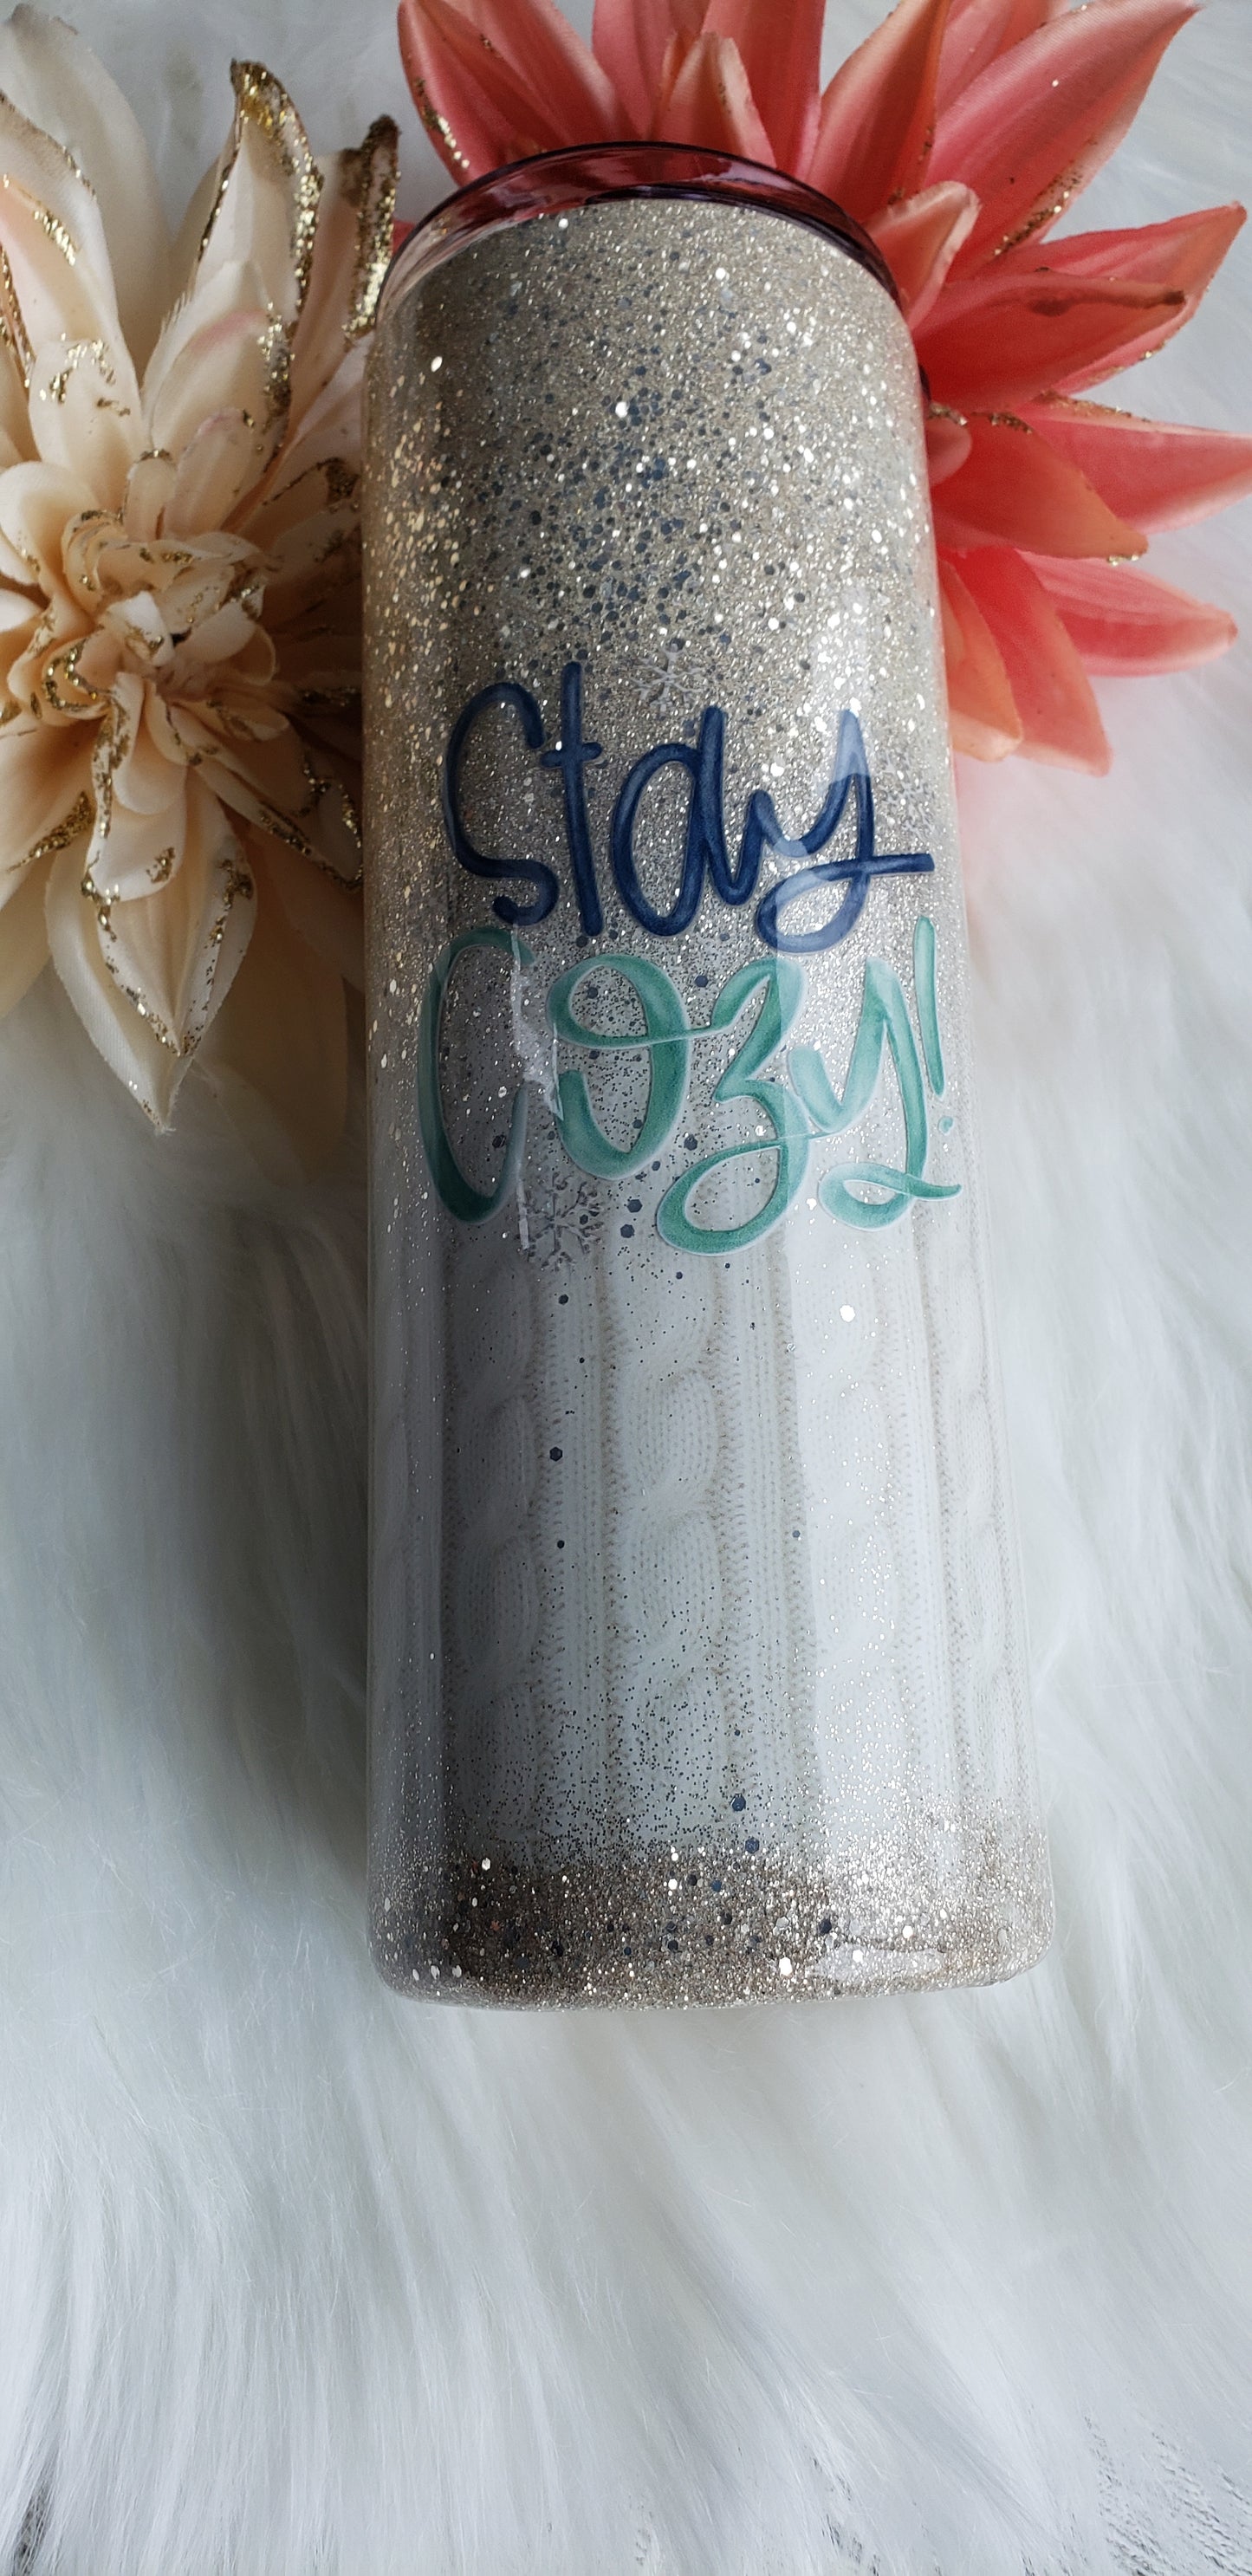 20 oz Stay Cozy Stainless Steal Tumbler